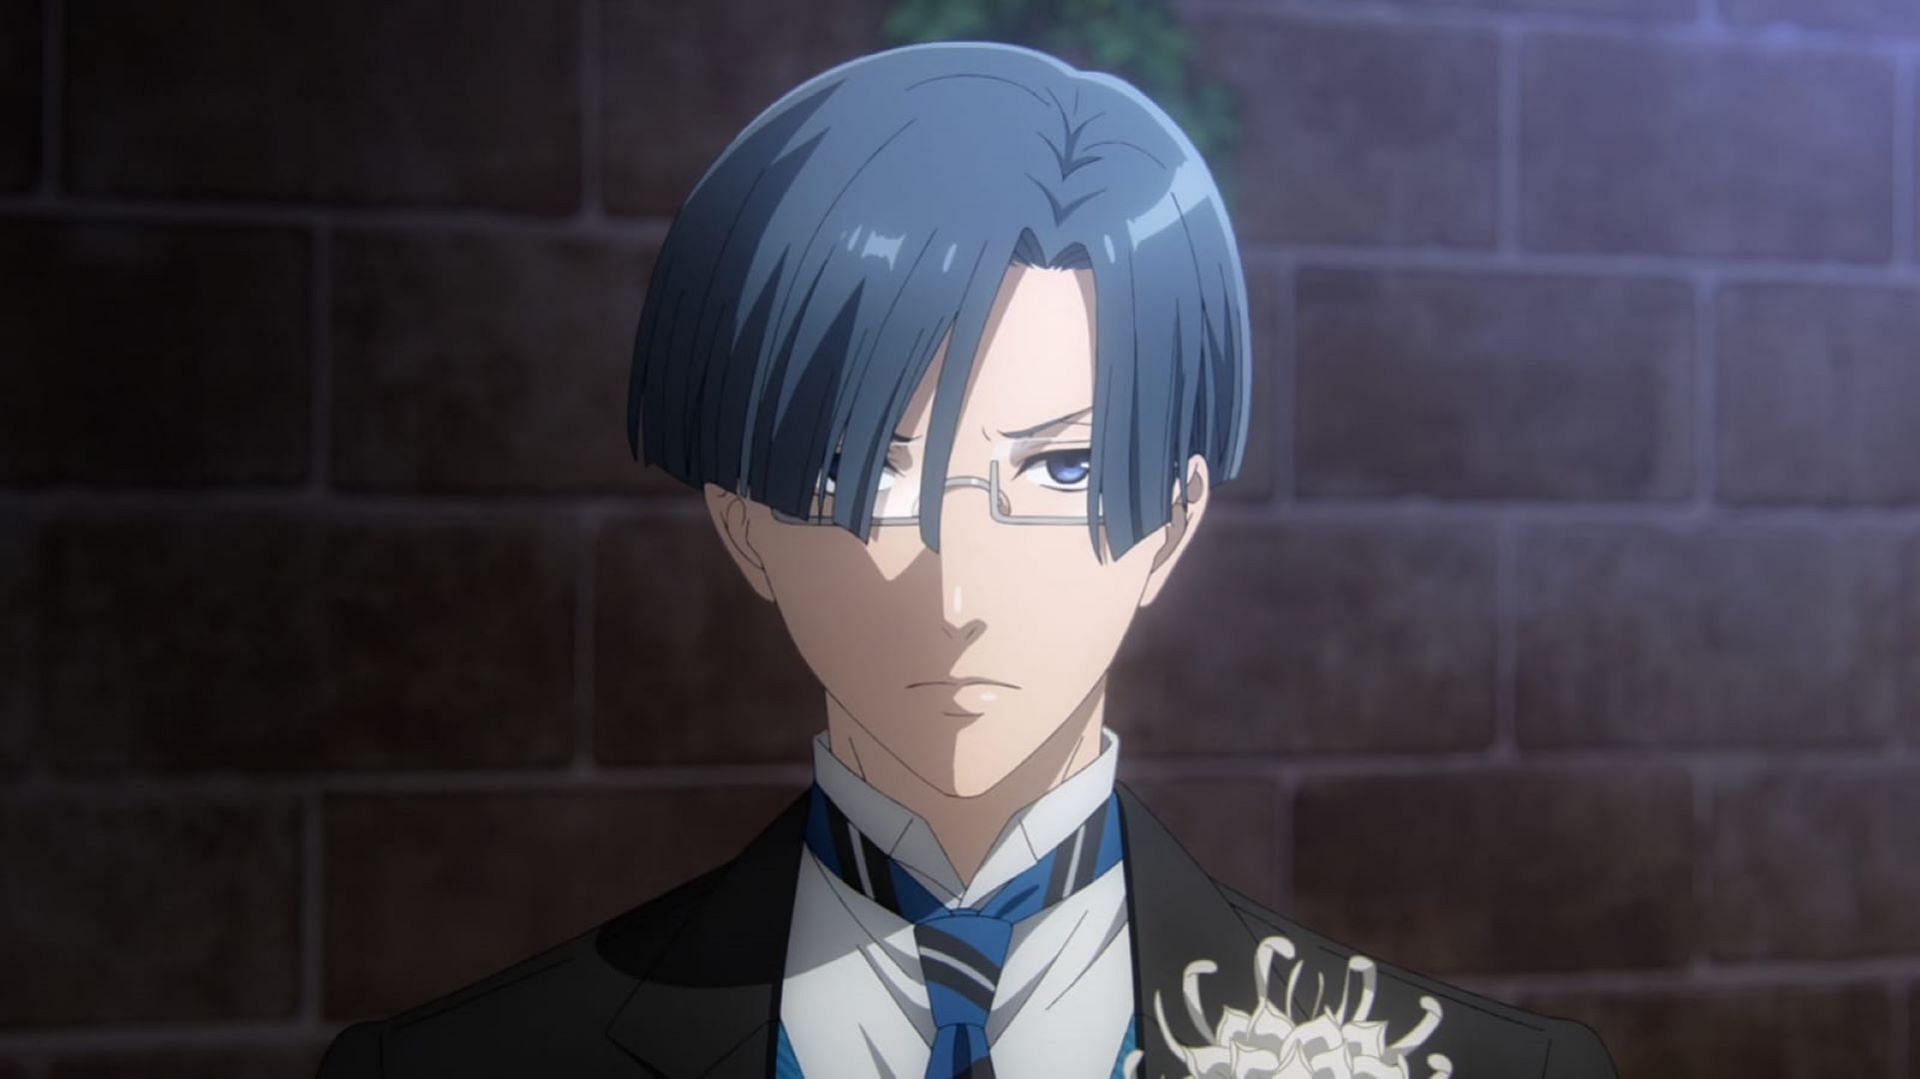 Lawrence Bluewer, as seen in the episode (Image via Cloverworks)